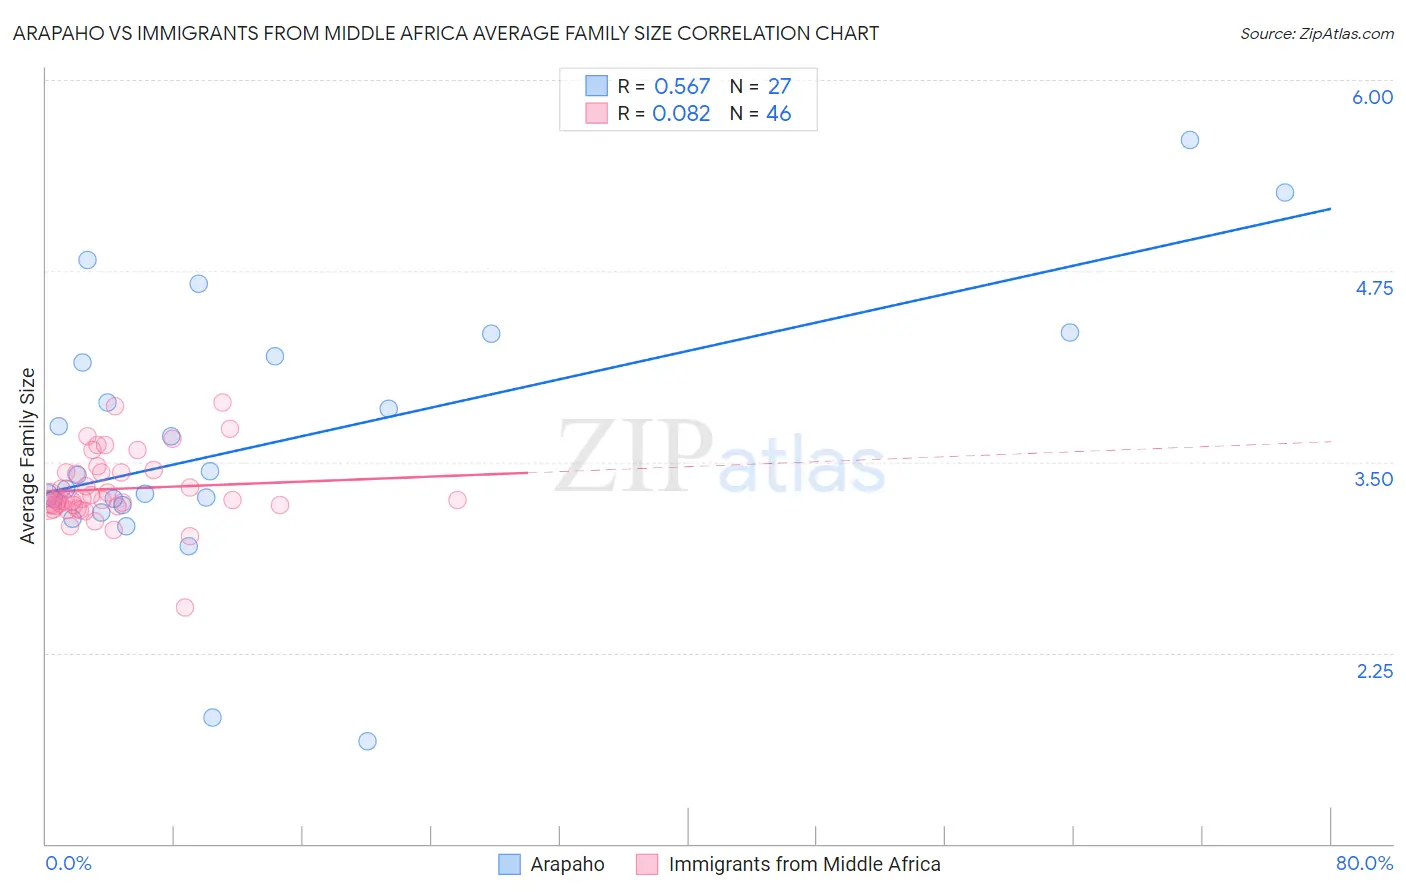 Arapaho vs Immigrants from Middle Africa Average Family Size